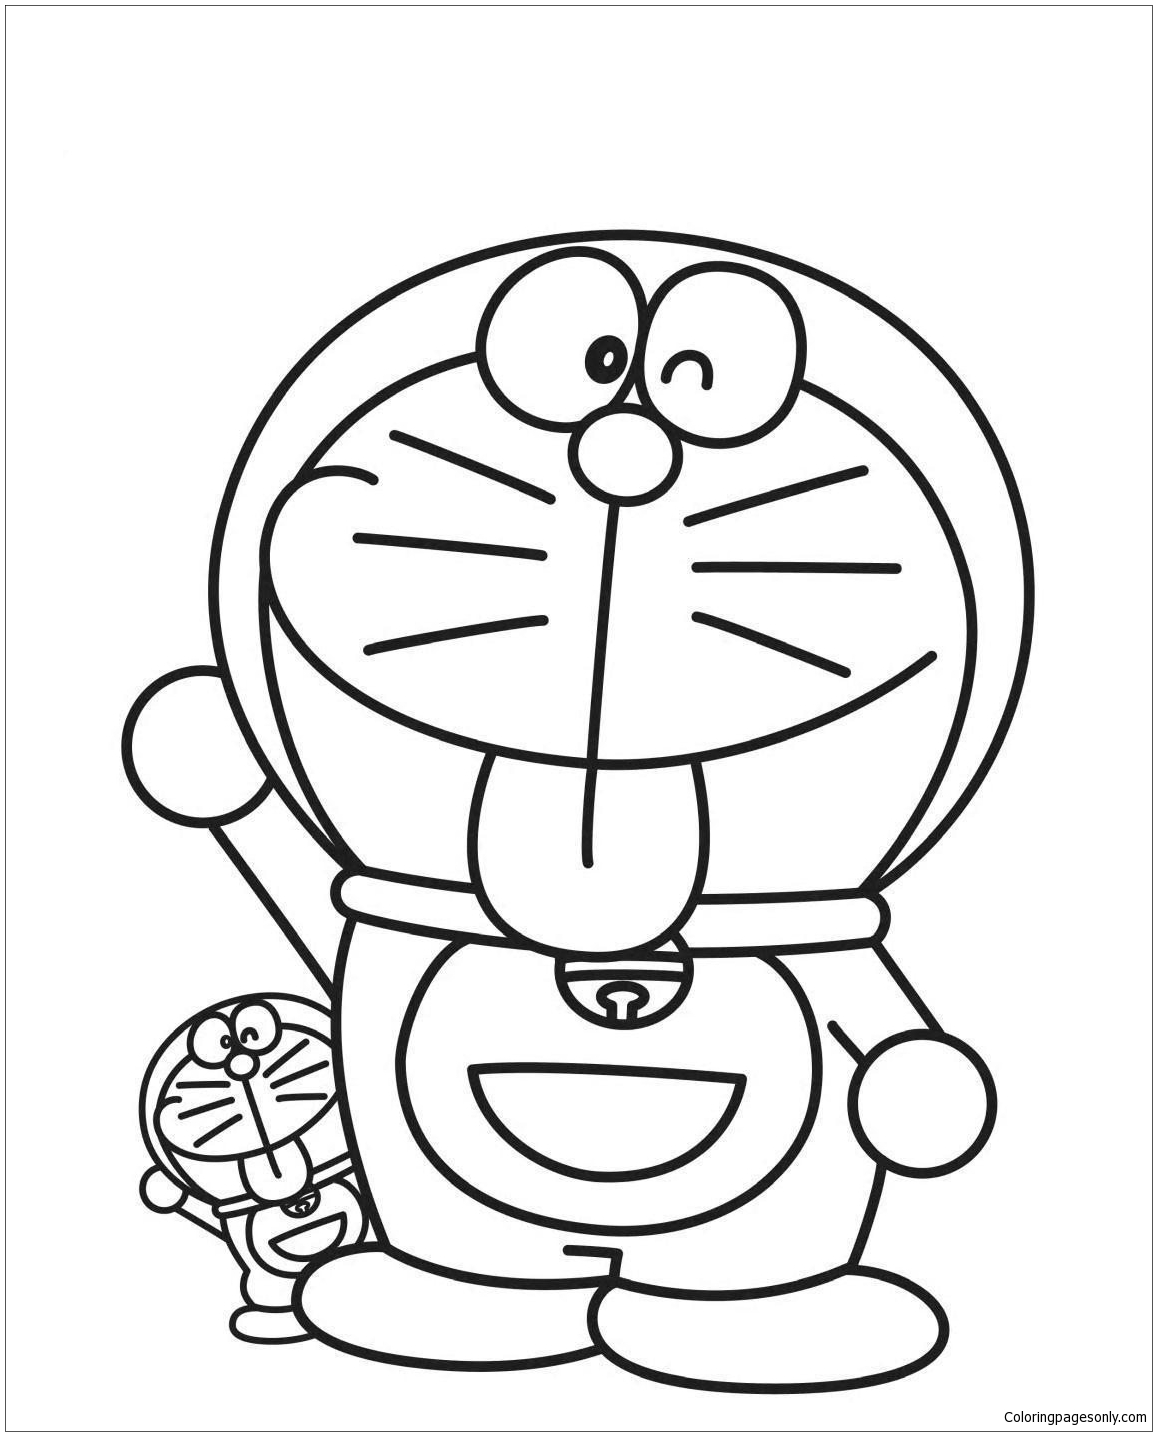 Big And Little Doraemon Coloring Page